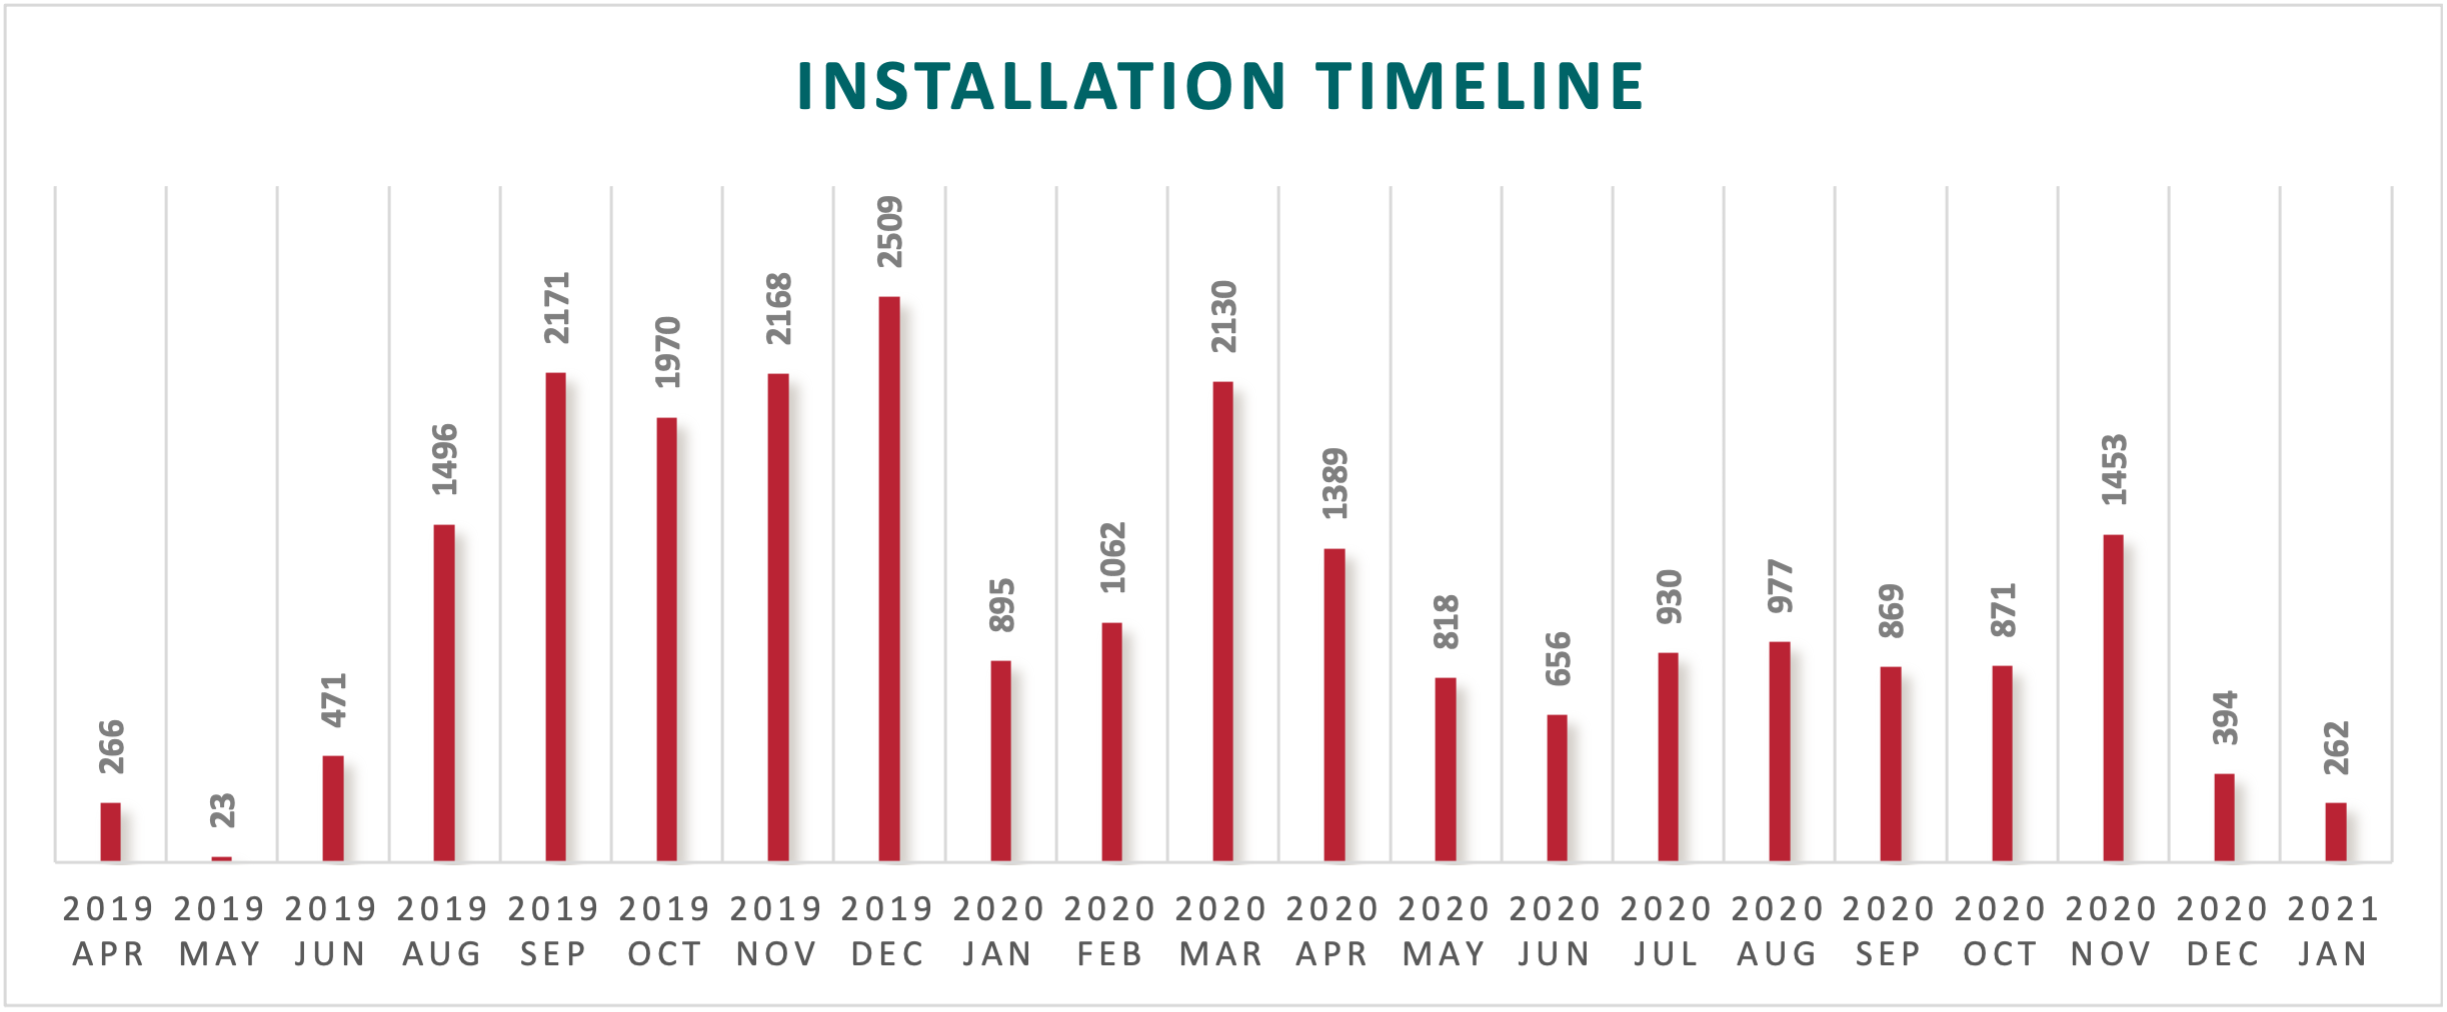 Bar graph of installation events over time